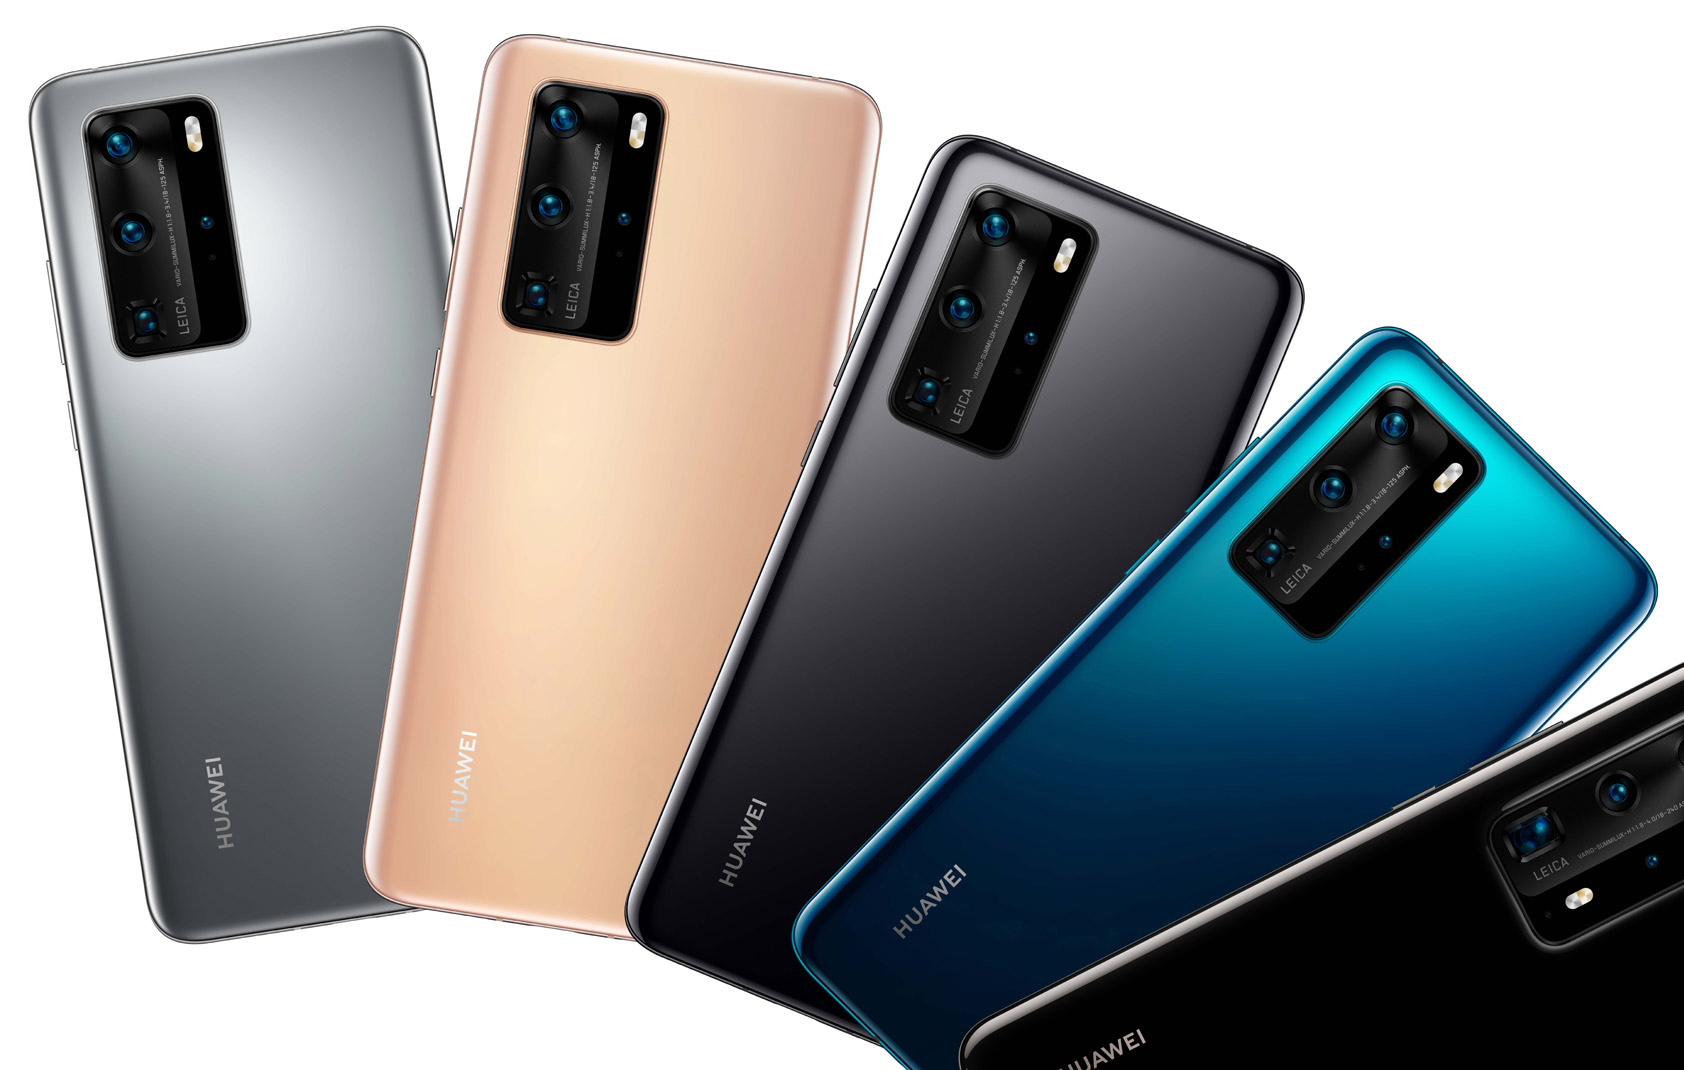 Here are the colour options for the Huawei P40, P40 Pro and P40 Pro "PE